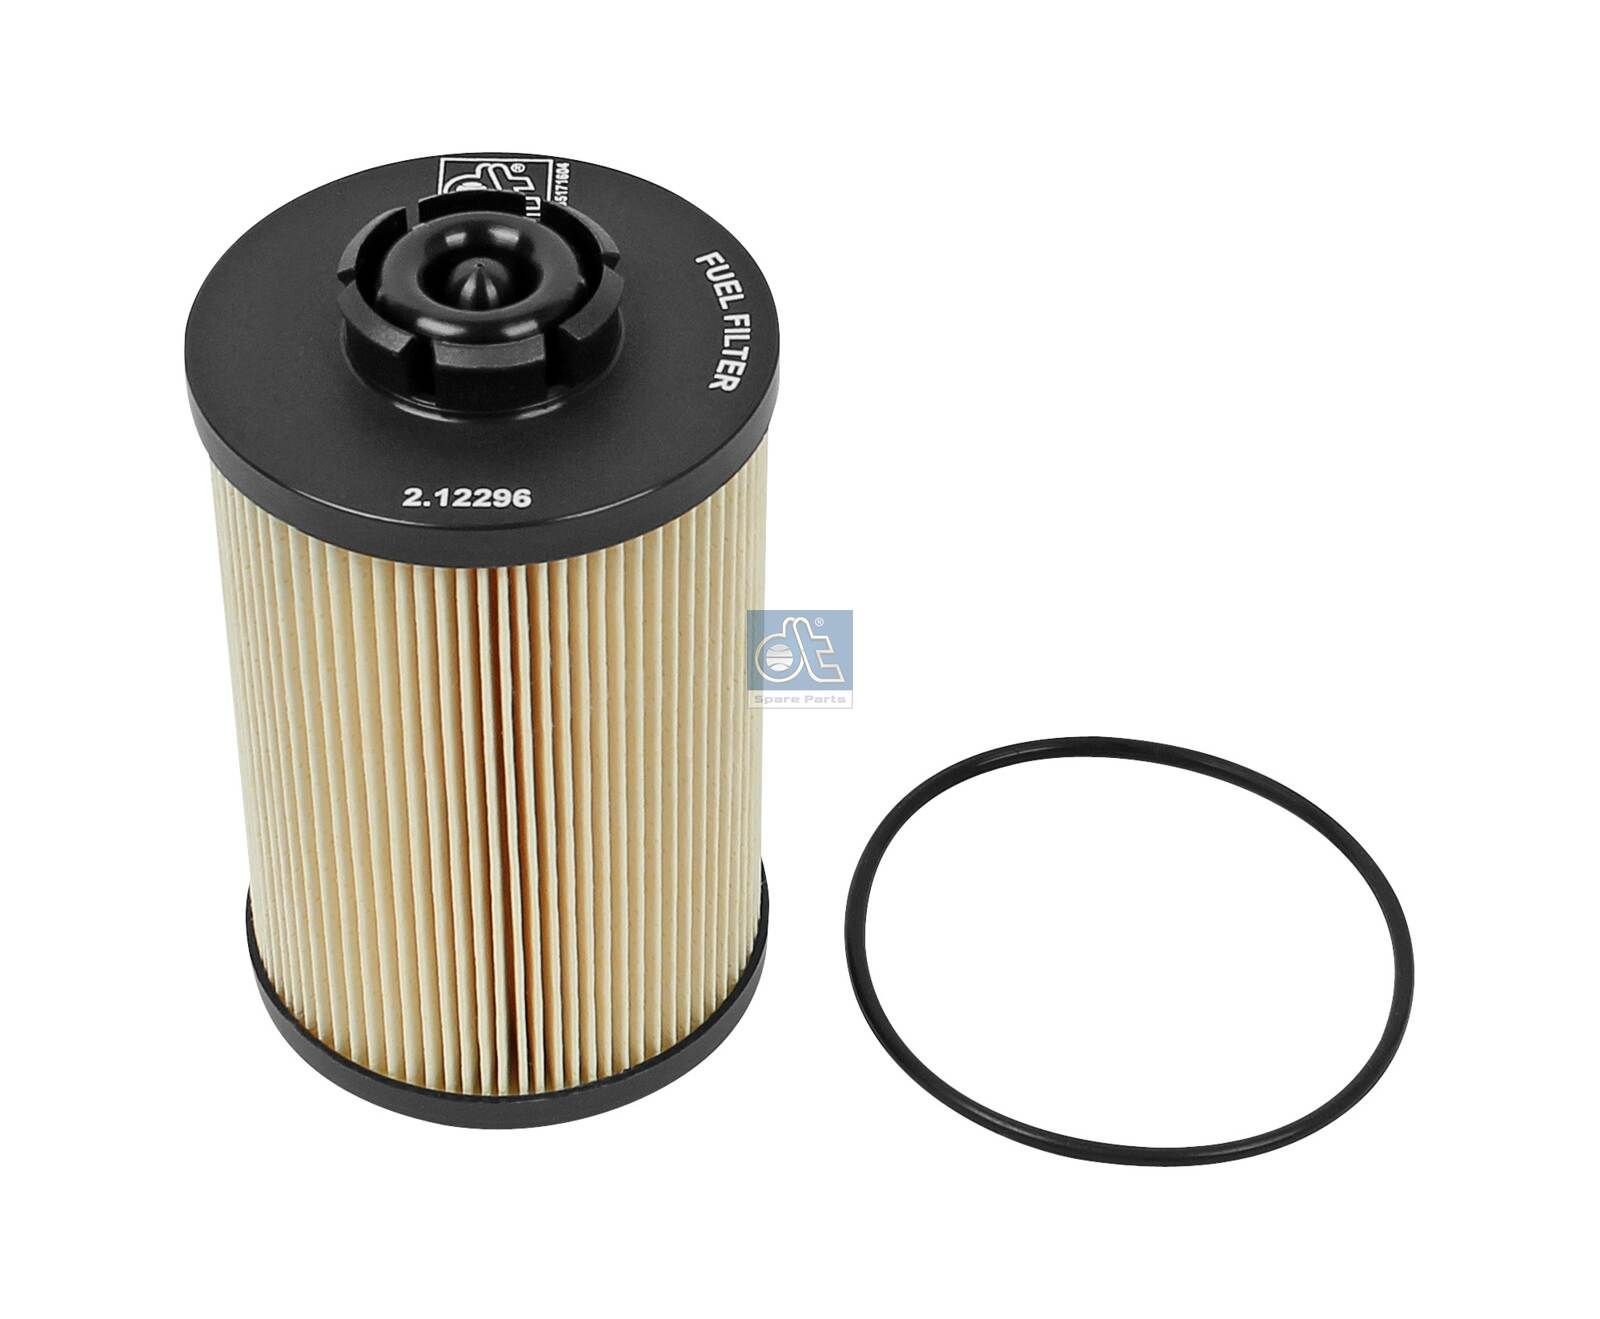 PU 1058X DT Spare Parts 2.12296 Fuel filter 2 931 712